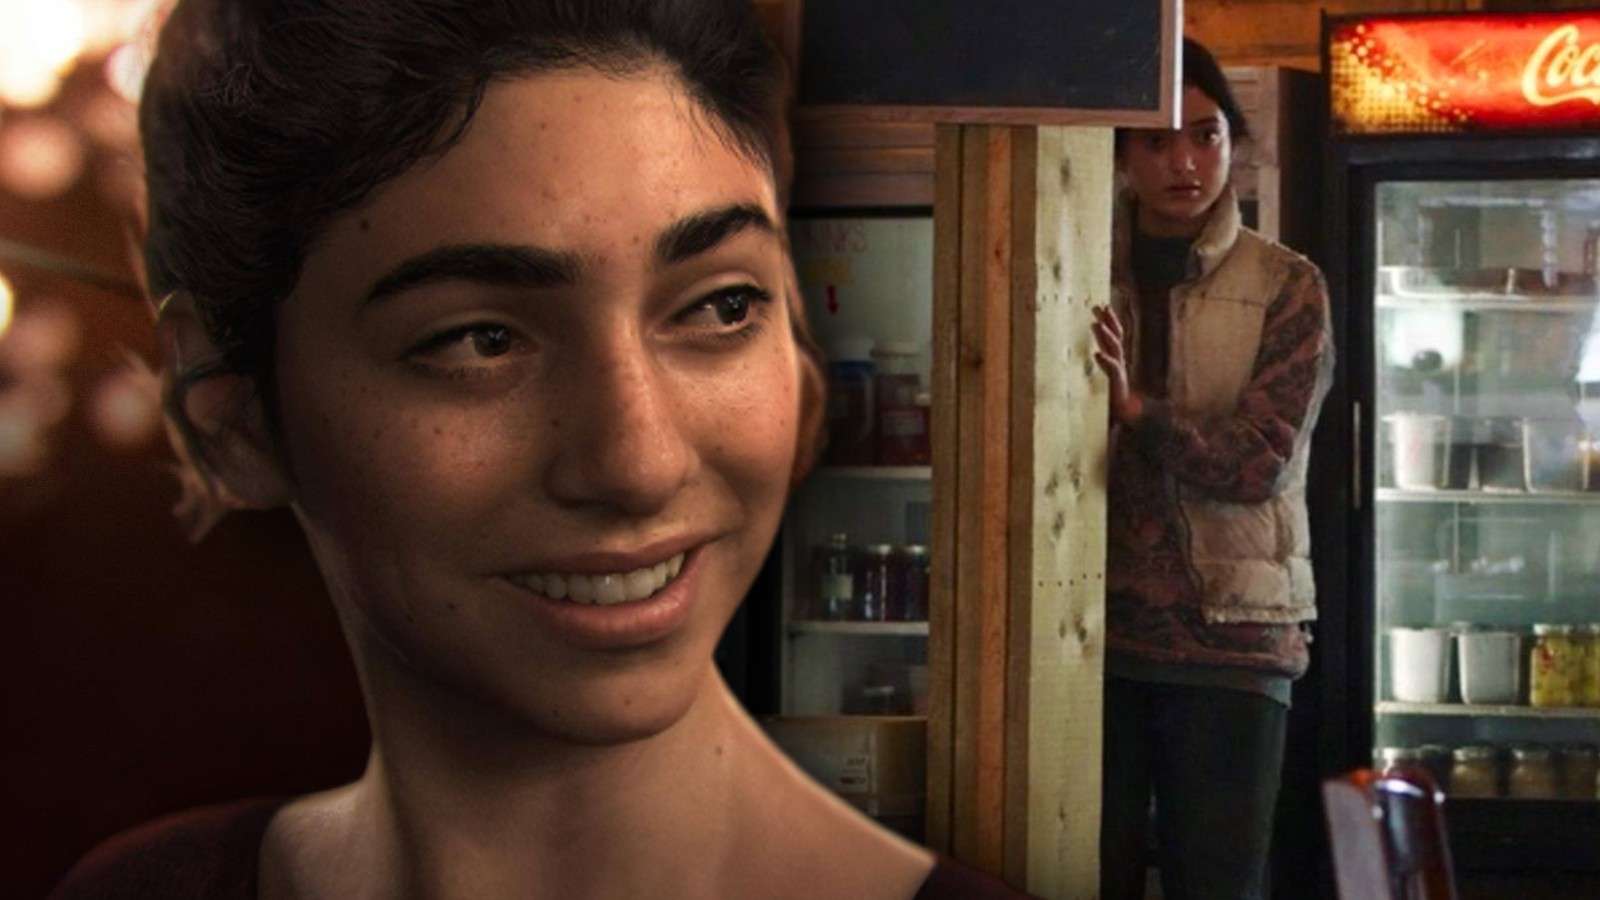 Dina in The Last of Us Part 2 and Episode 6